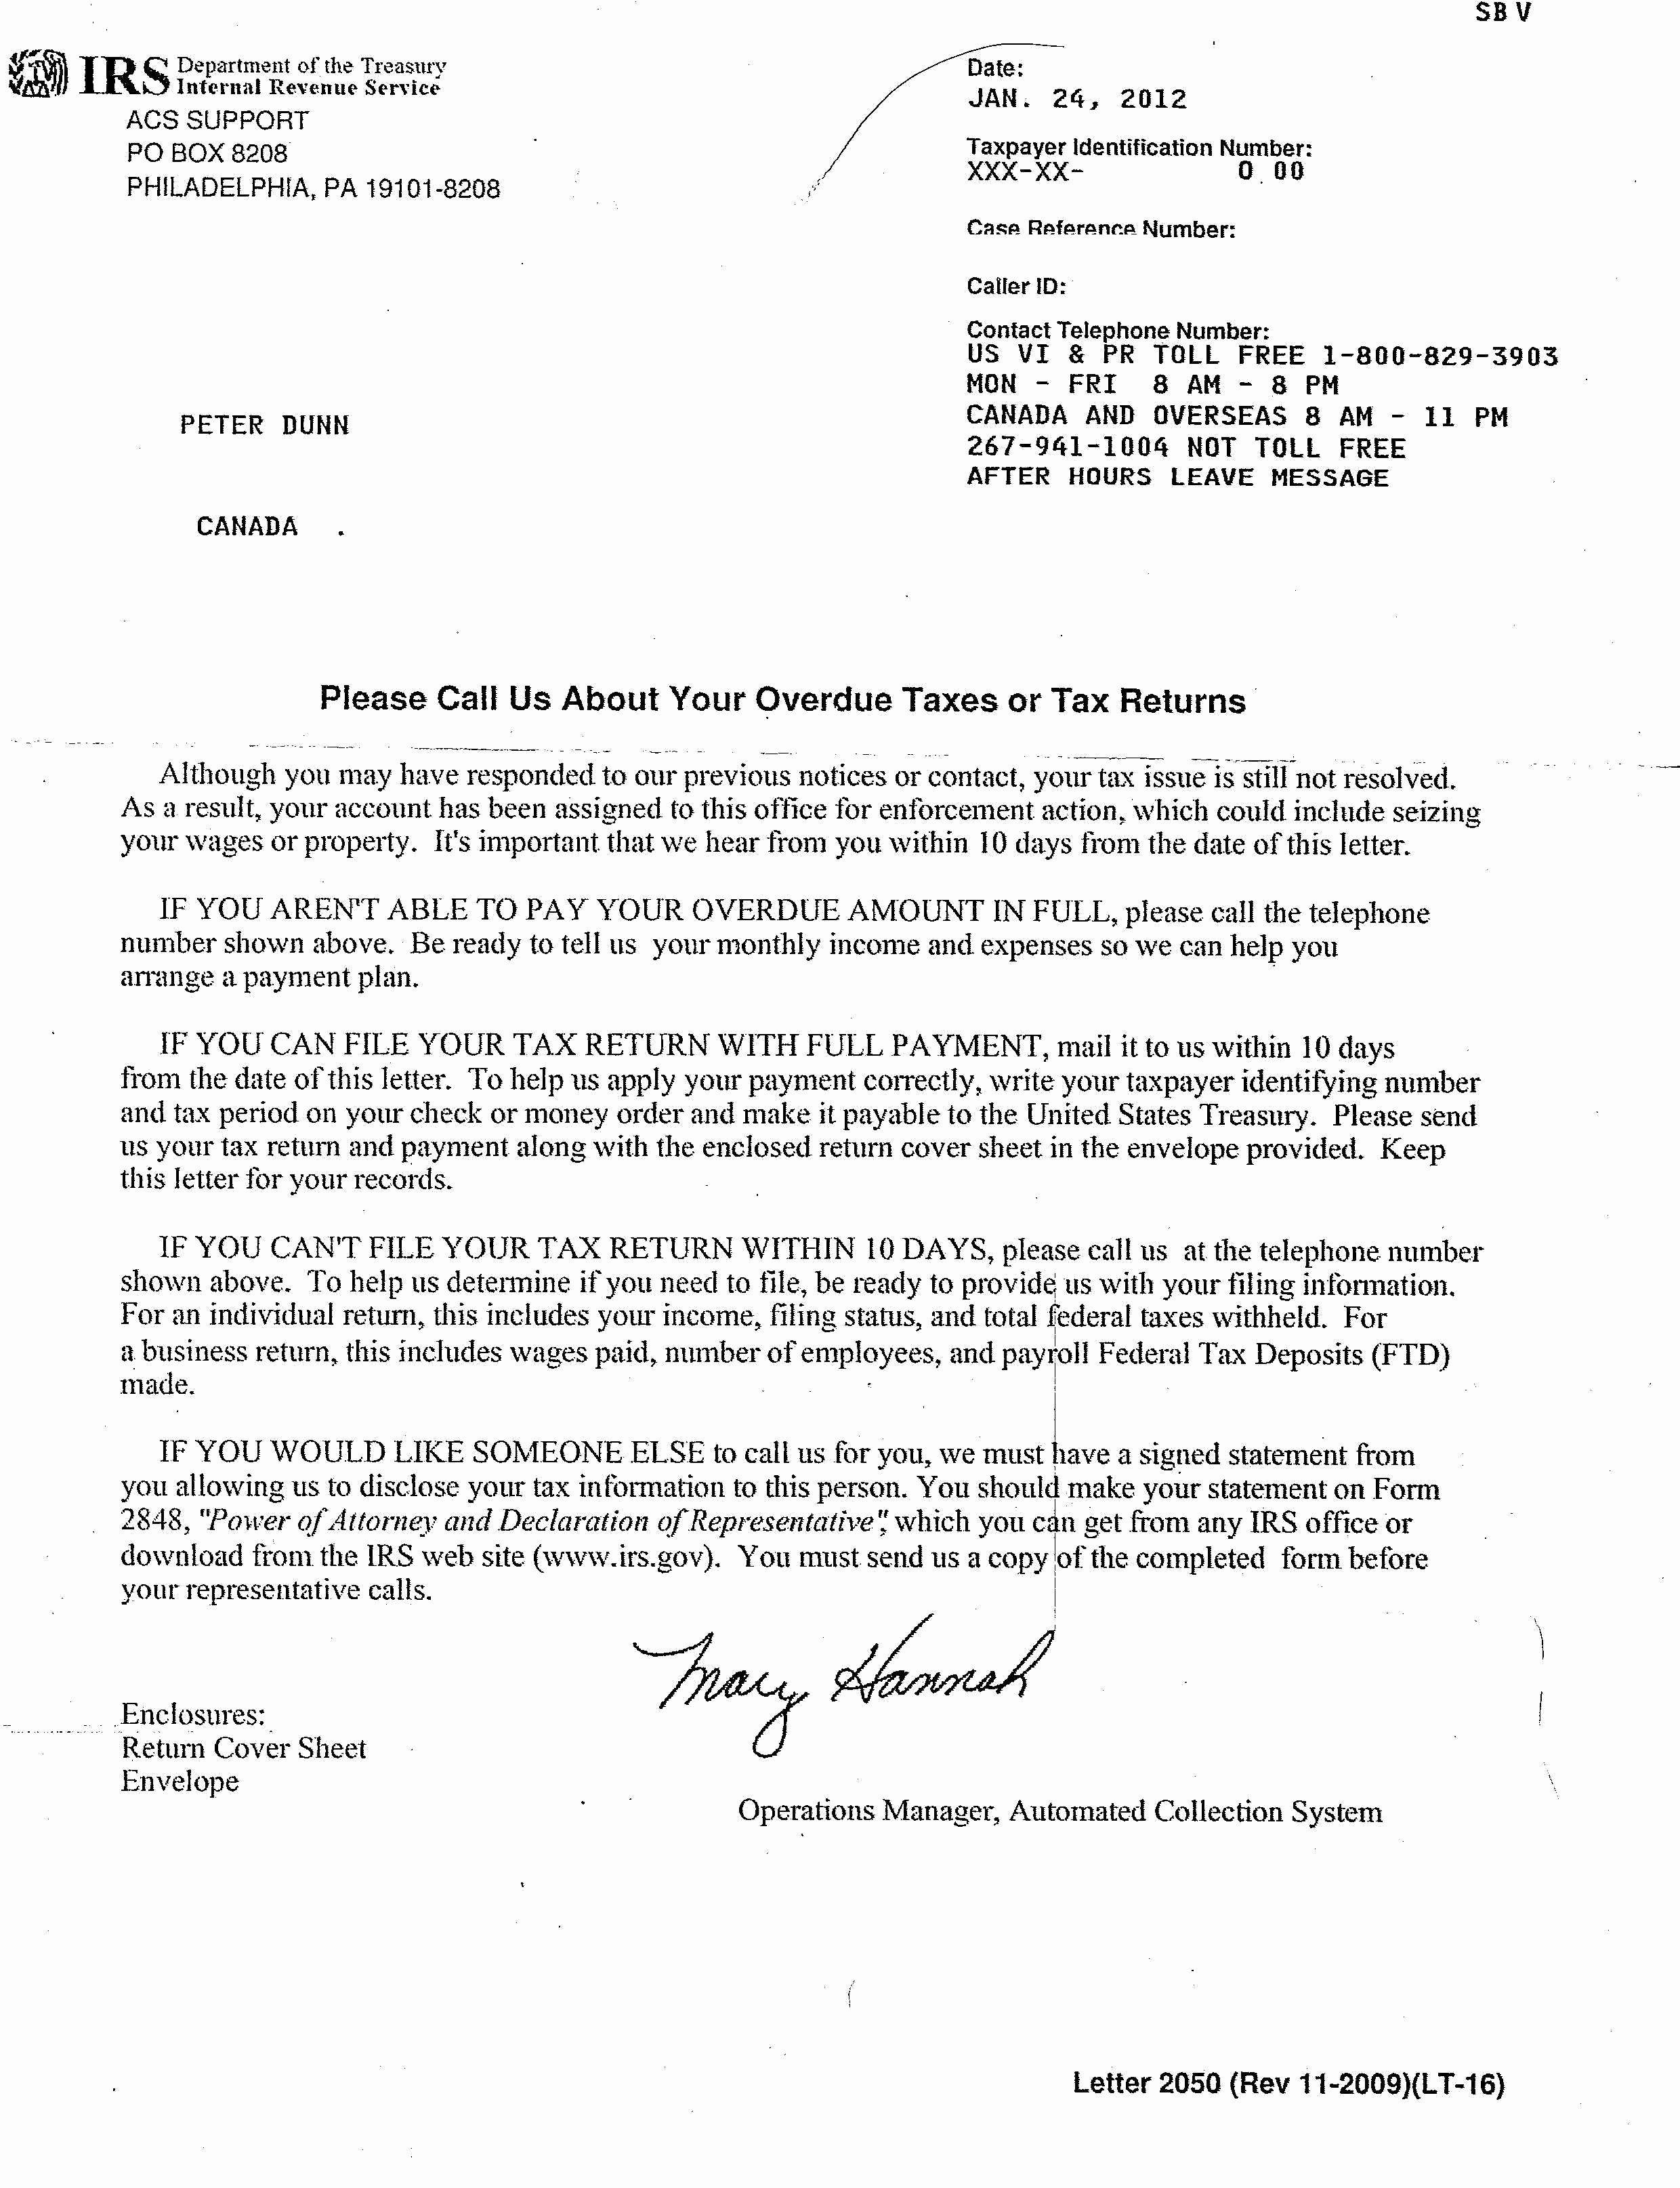 No Refunds Policy Template Lovely Letter From the Irs